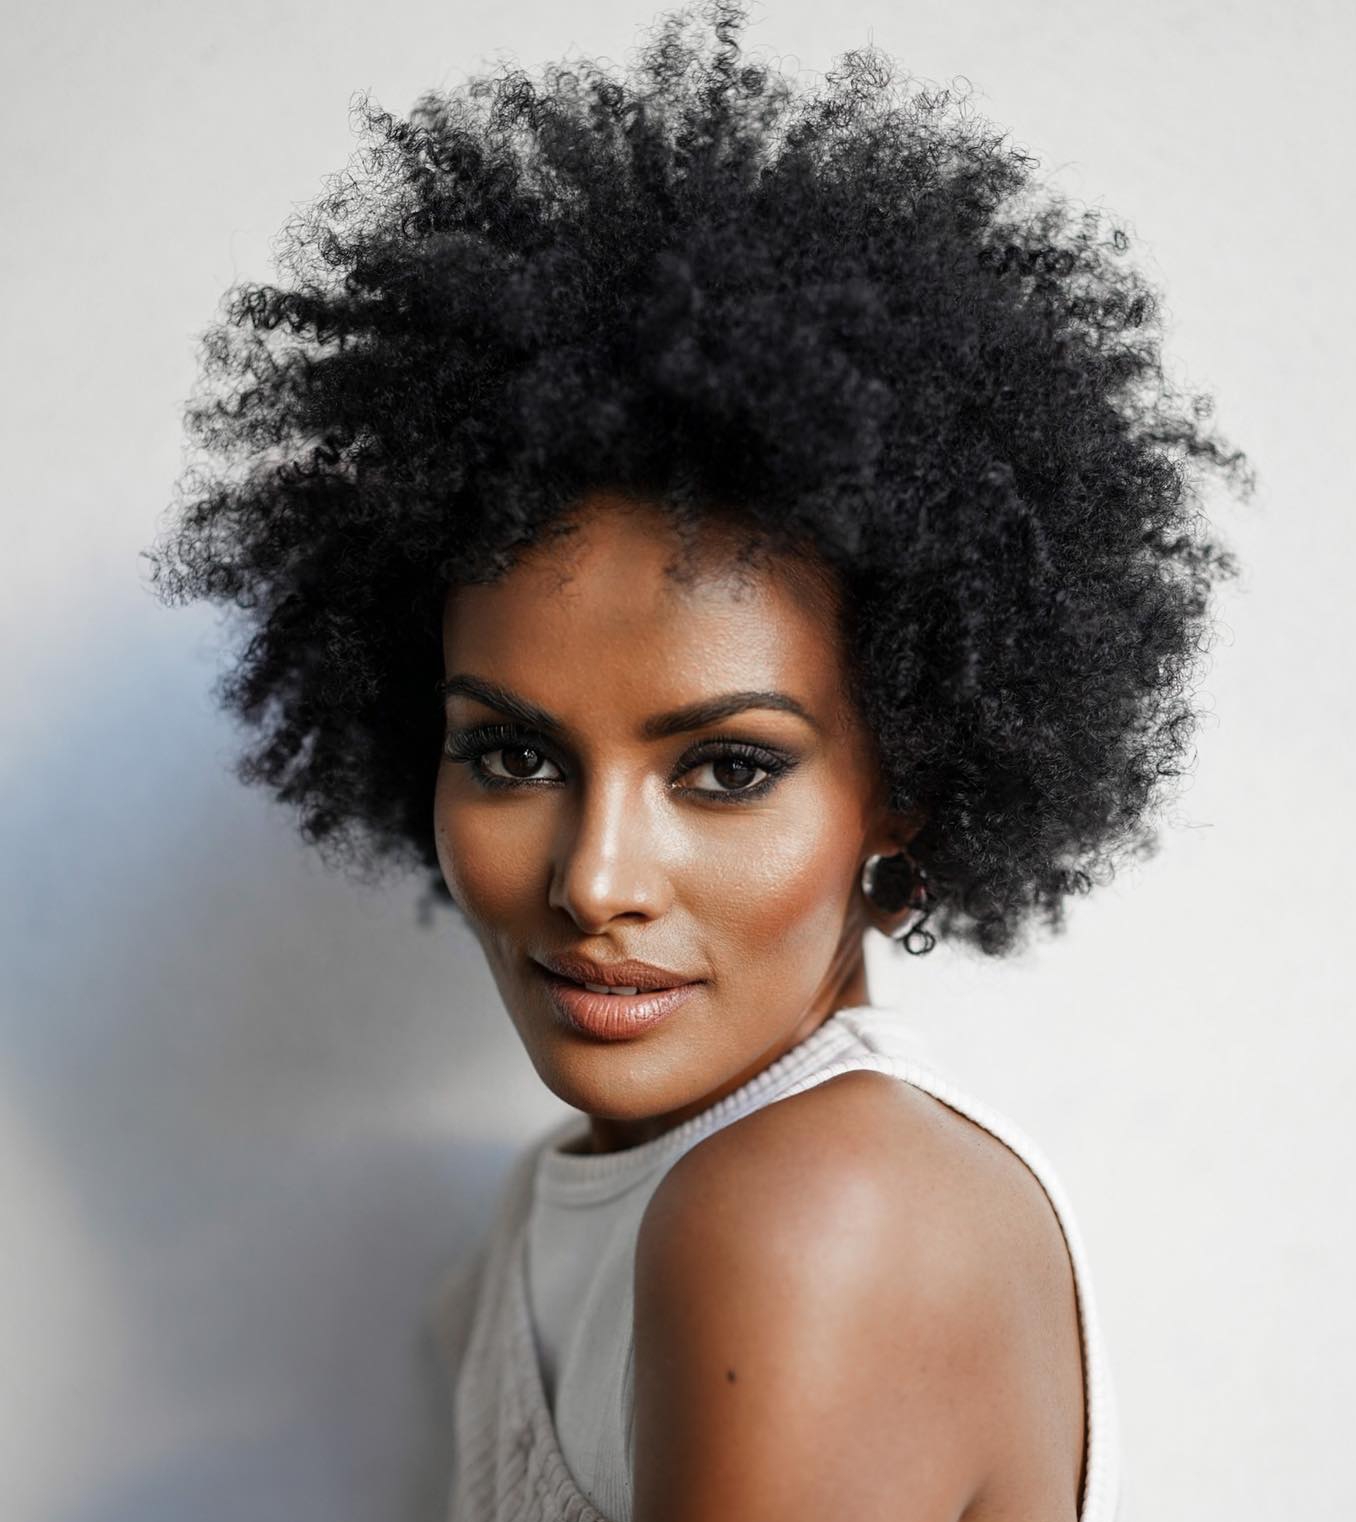 60 Short Curly Hair Ideas to Embrace Your Natural Beauty - Hairstyle